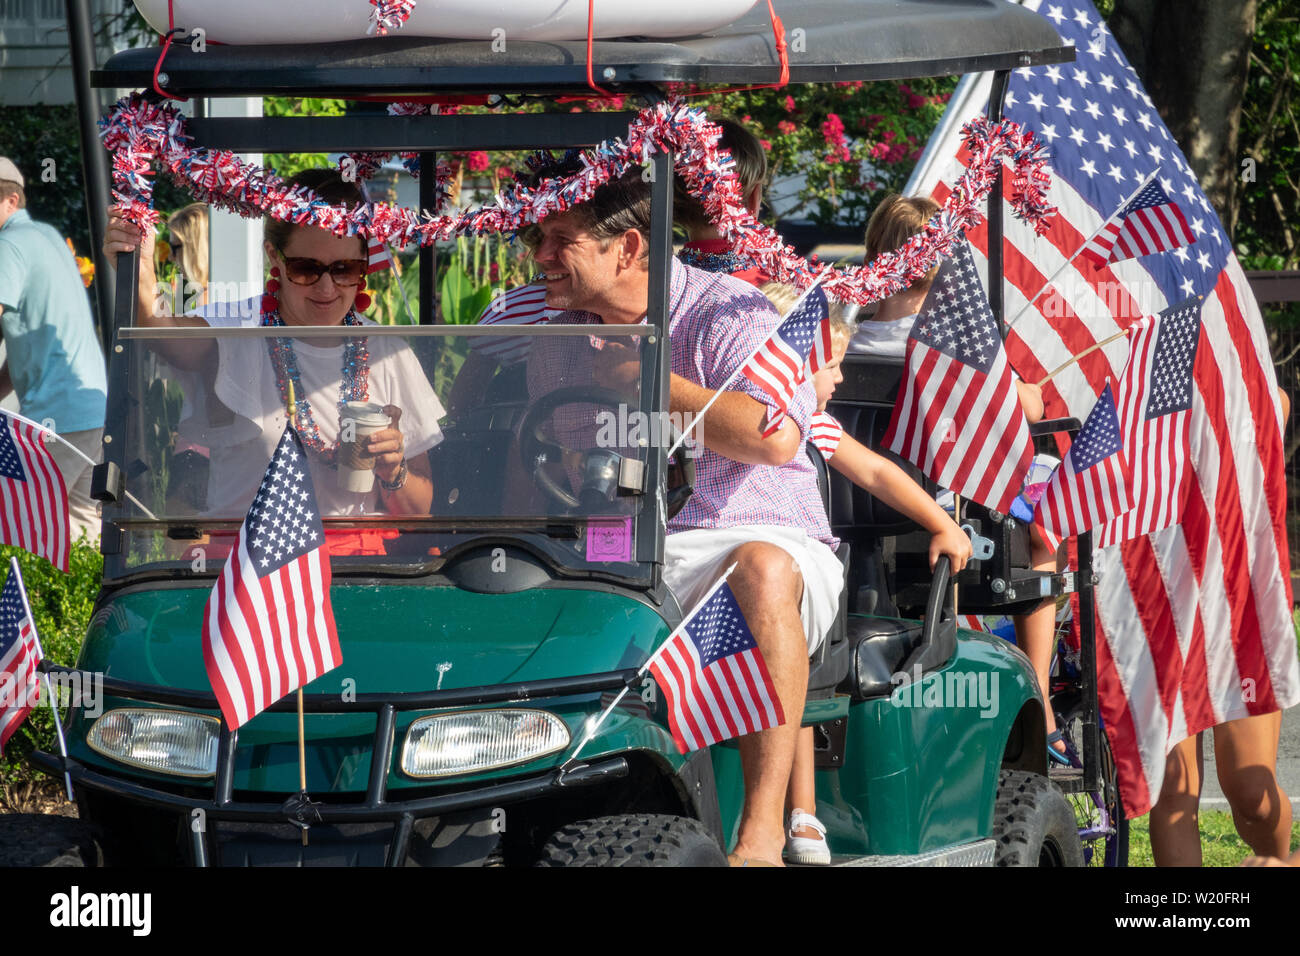 A golf cart float decorated with flags during the annual Independence Day golf cart and bicycle parade July 4, 2019 in Sullivan's Island, South Carolina. The tiny affluent Sea Island beach community across from Charleston holds an outsized golf cart parade featuring more than 75 decorated carts. Stock Photo